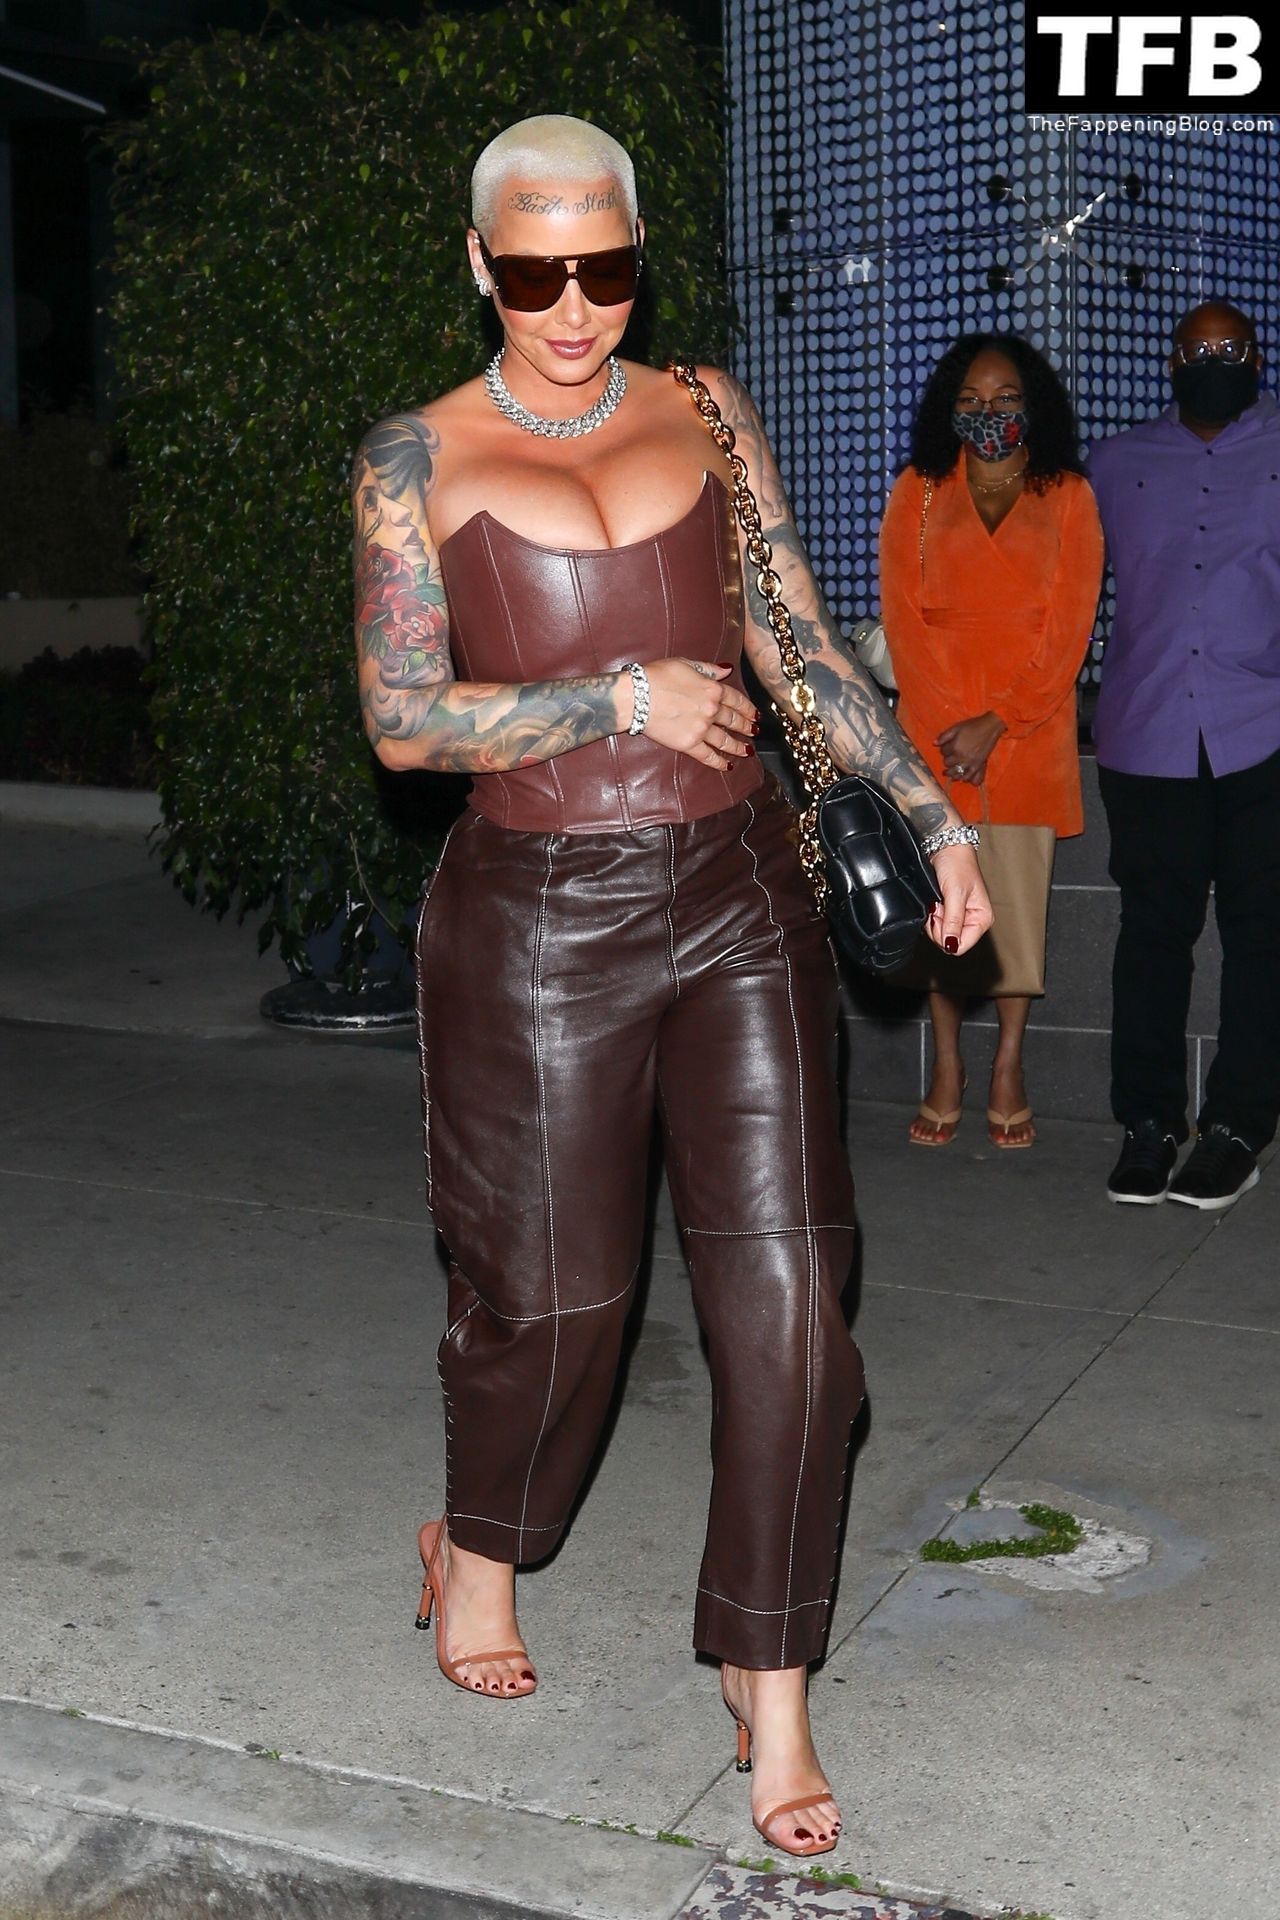 Amber-Rose-Sexy-The-Fappening-Blog-23.jpg